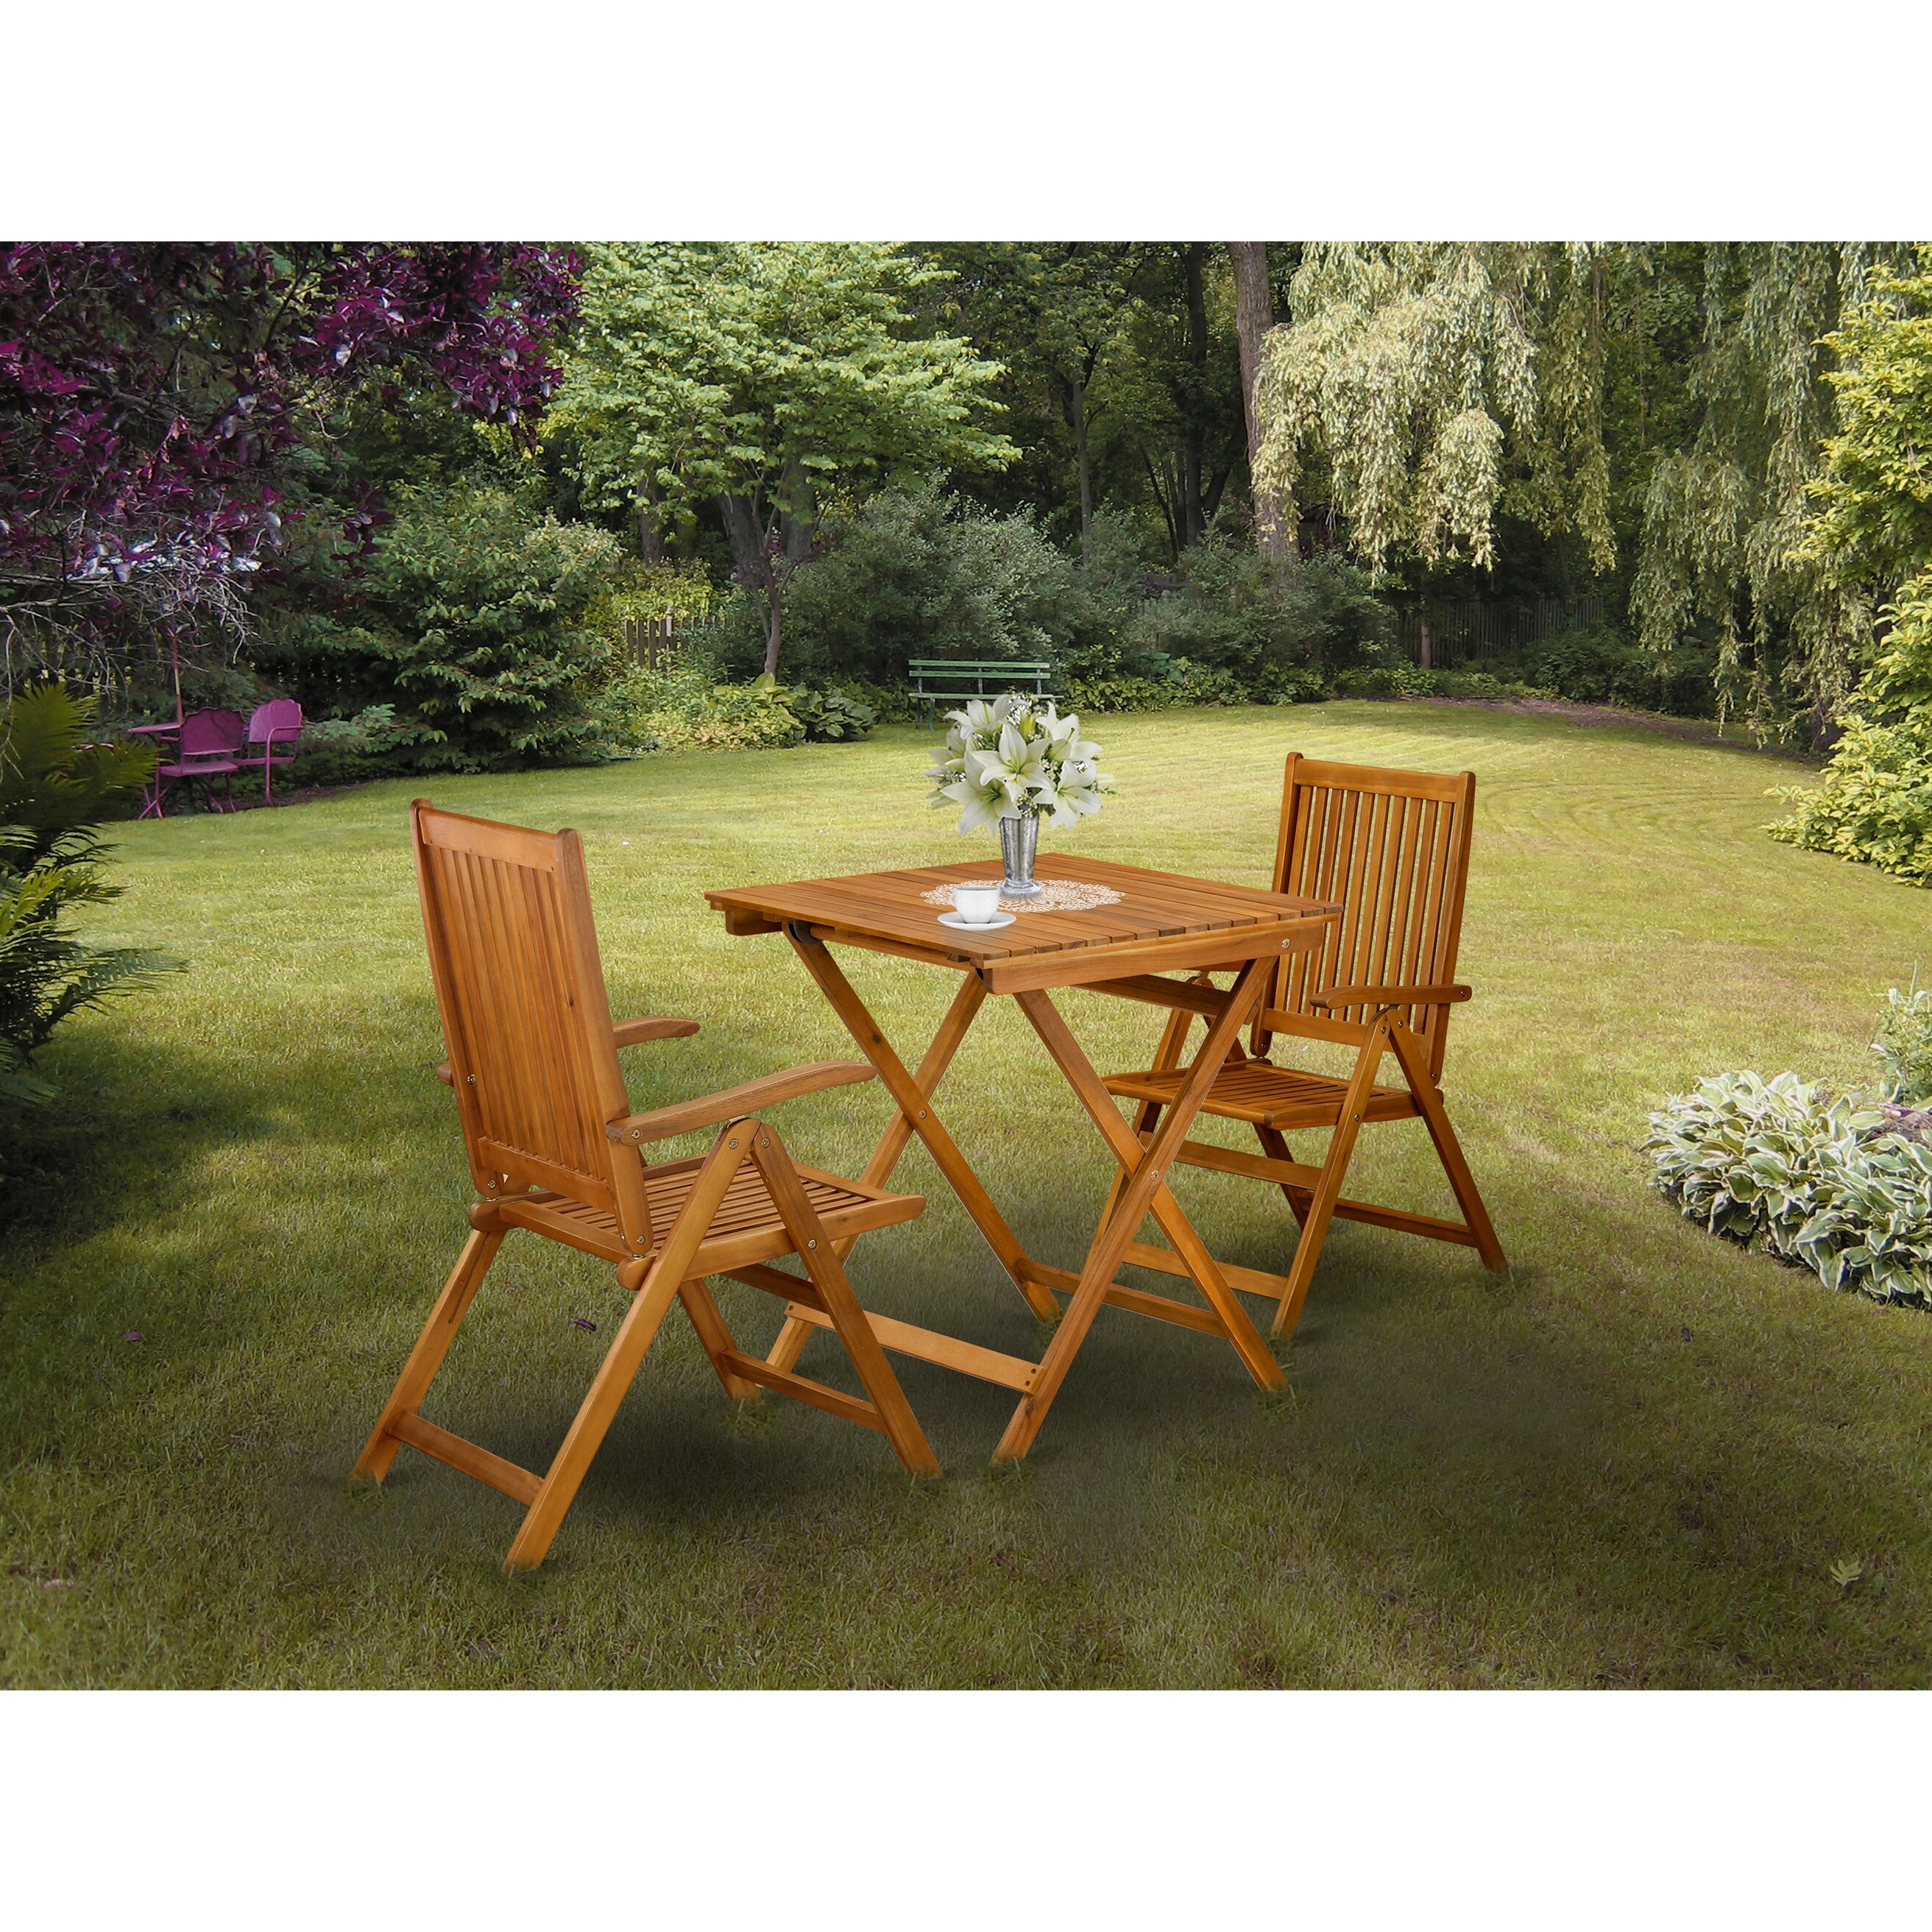 3 Piece Wood Patio Dining Set Consists Of A Wood Folding Table And 2 Bistro Chairs Ideal For Garden, Terrace, Bistro, And Porch